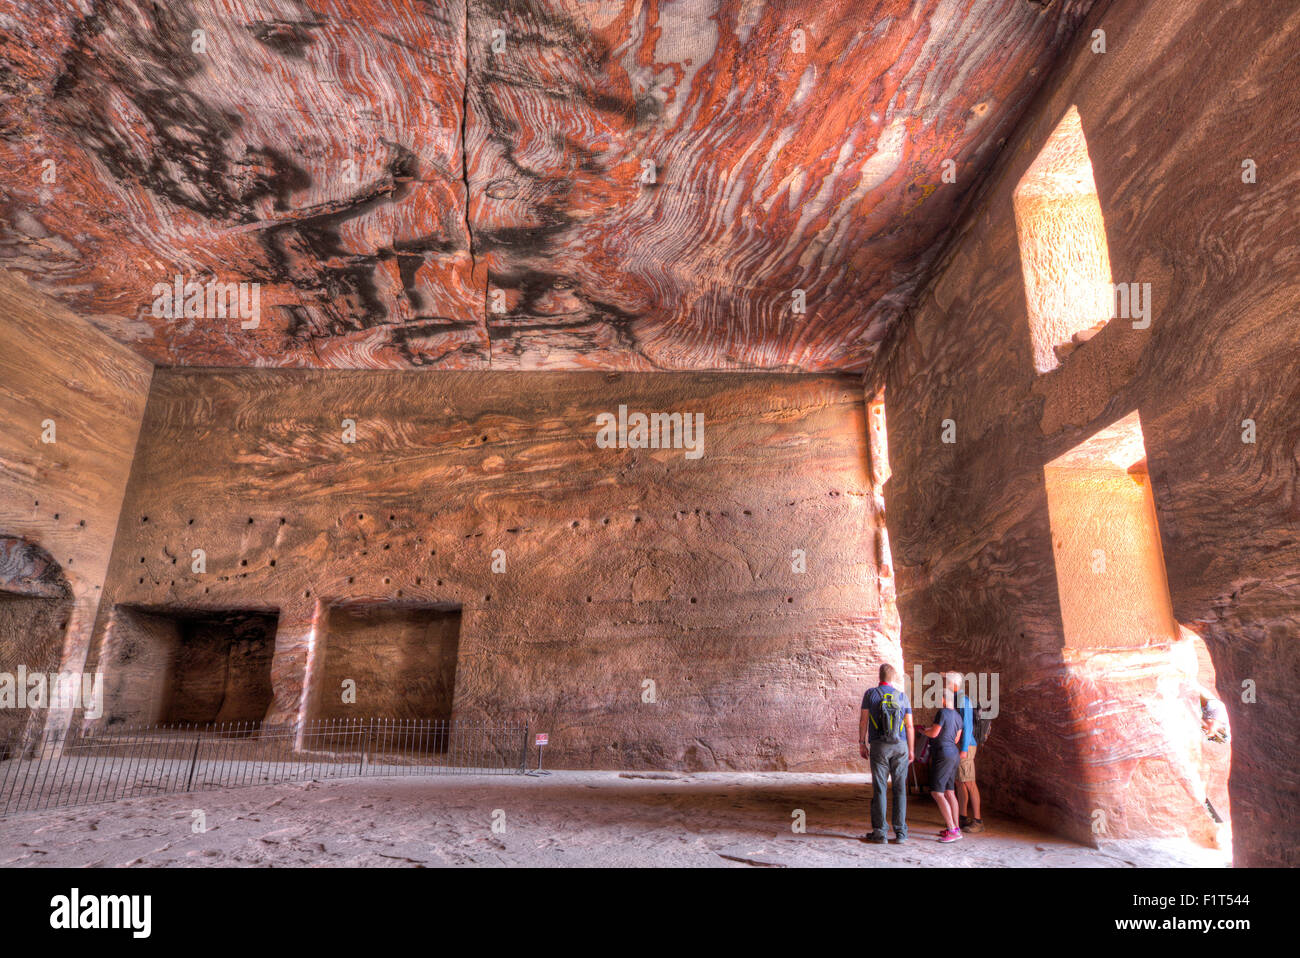 Inside the Urn Tomb, Royal Tombs, Petra, UNESCO World Heritage Site, Jordan, Middle East Stock Photo